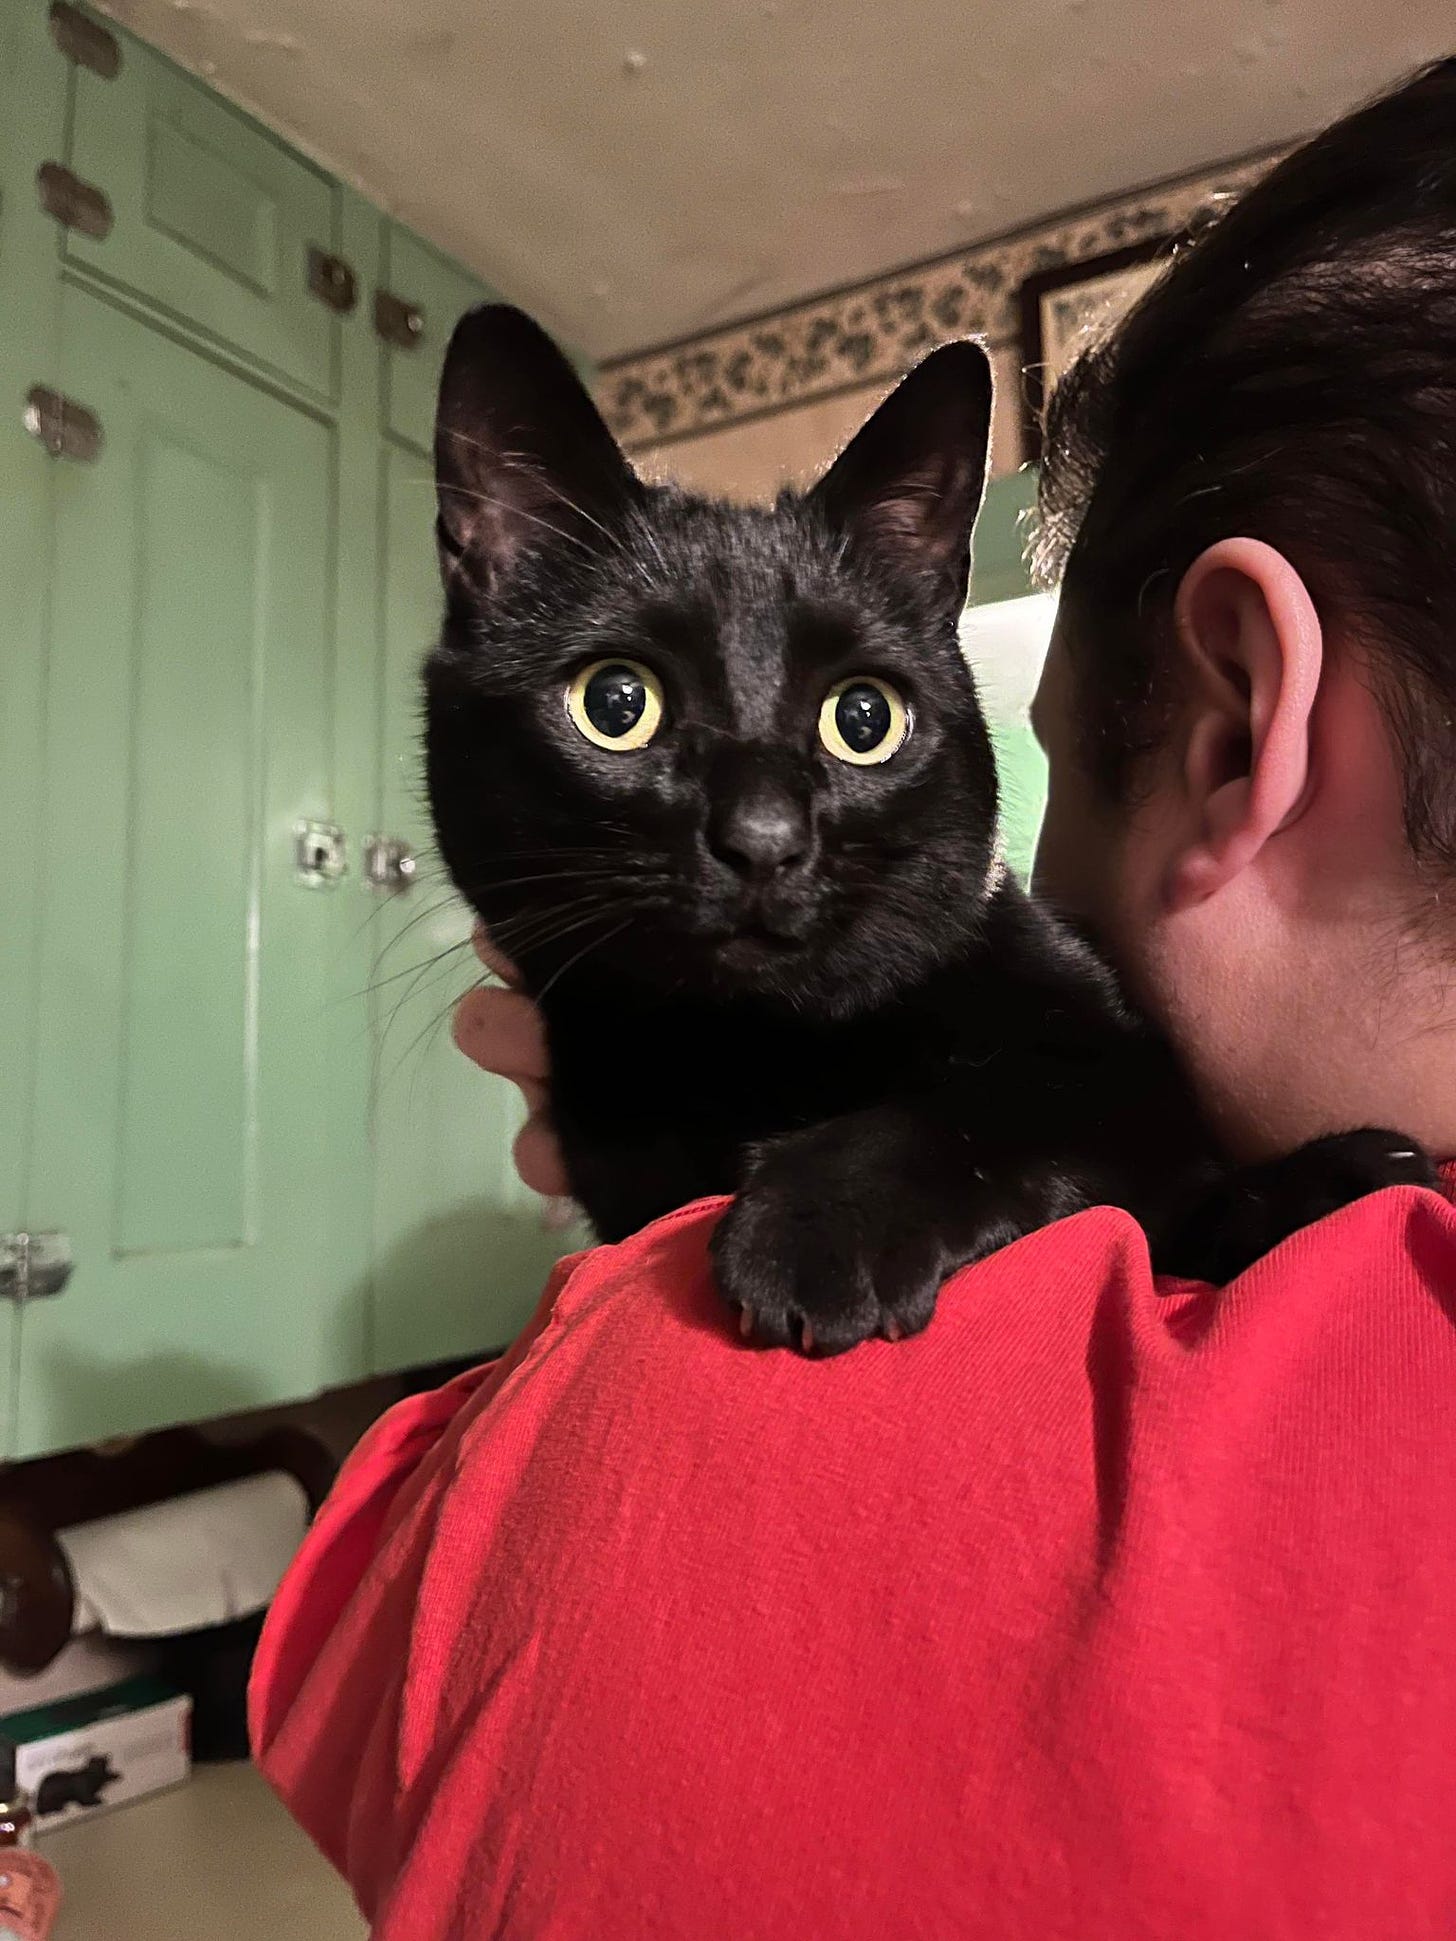 A black cat with gold eyes held on the shoulder of a man wearing a red shirt.